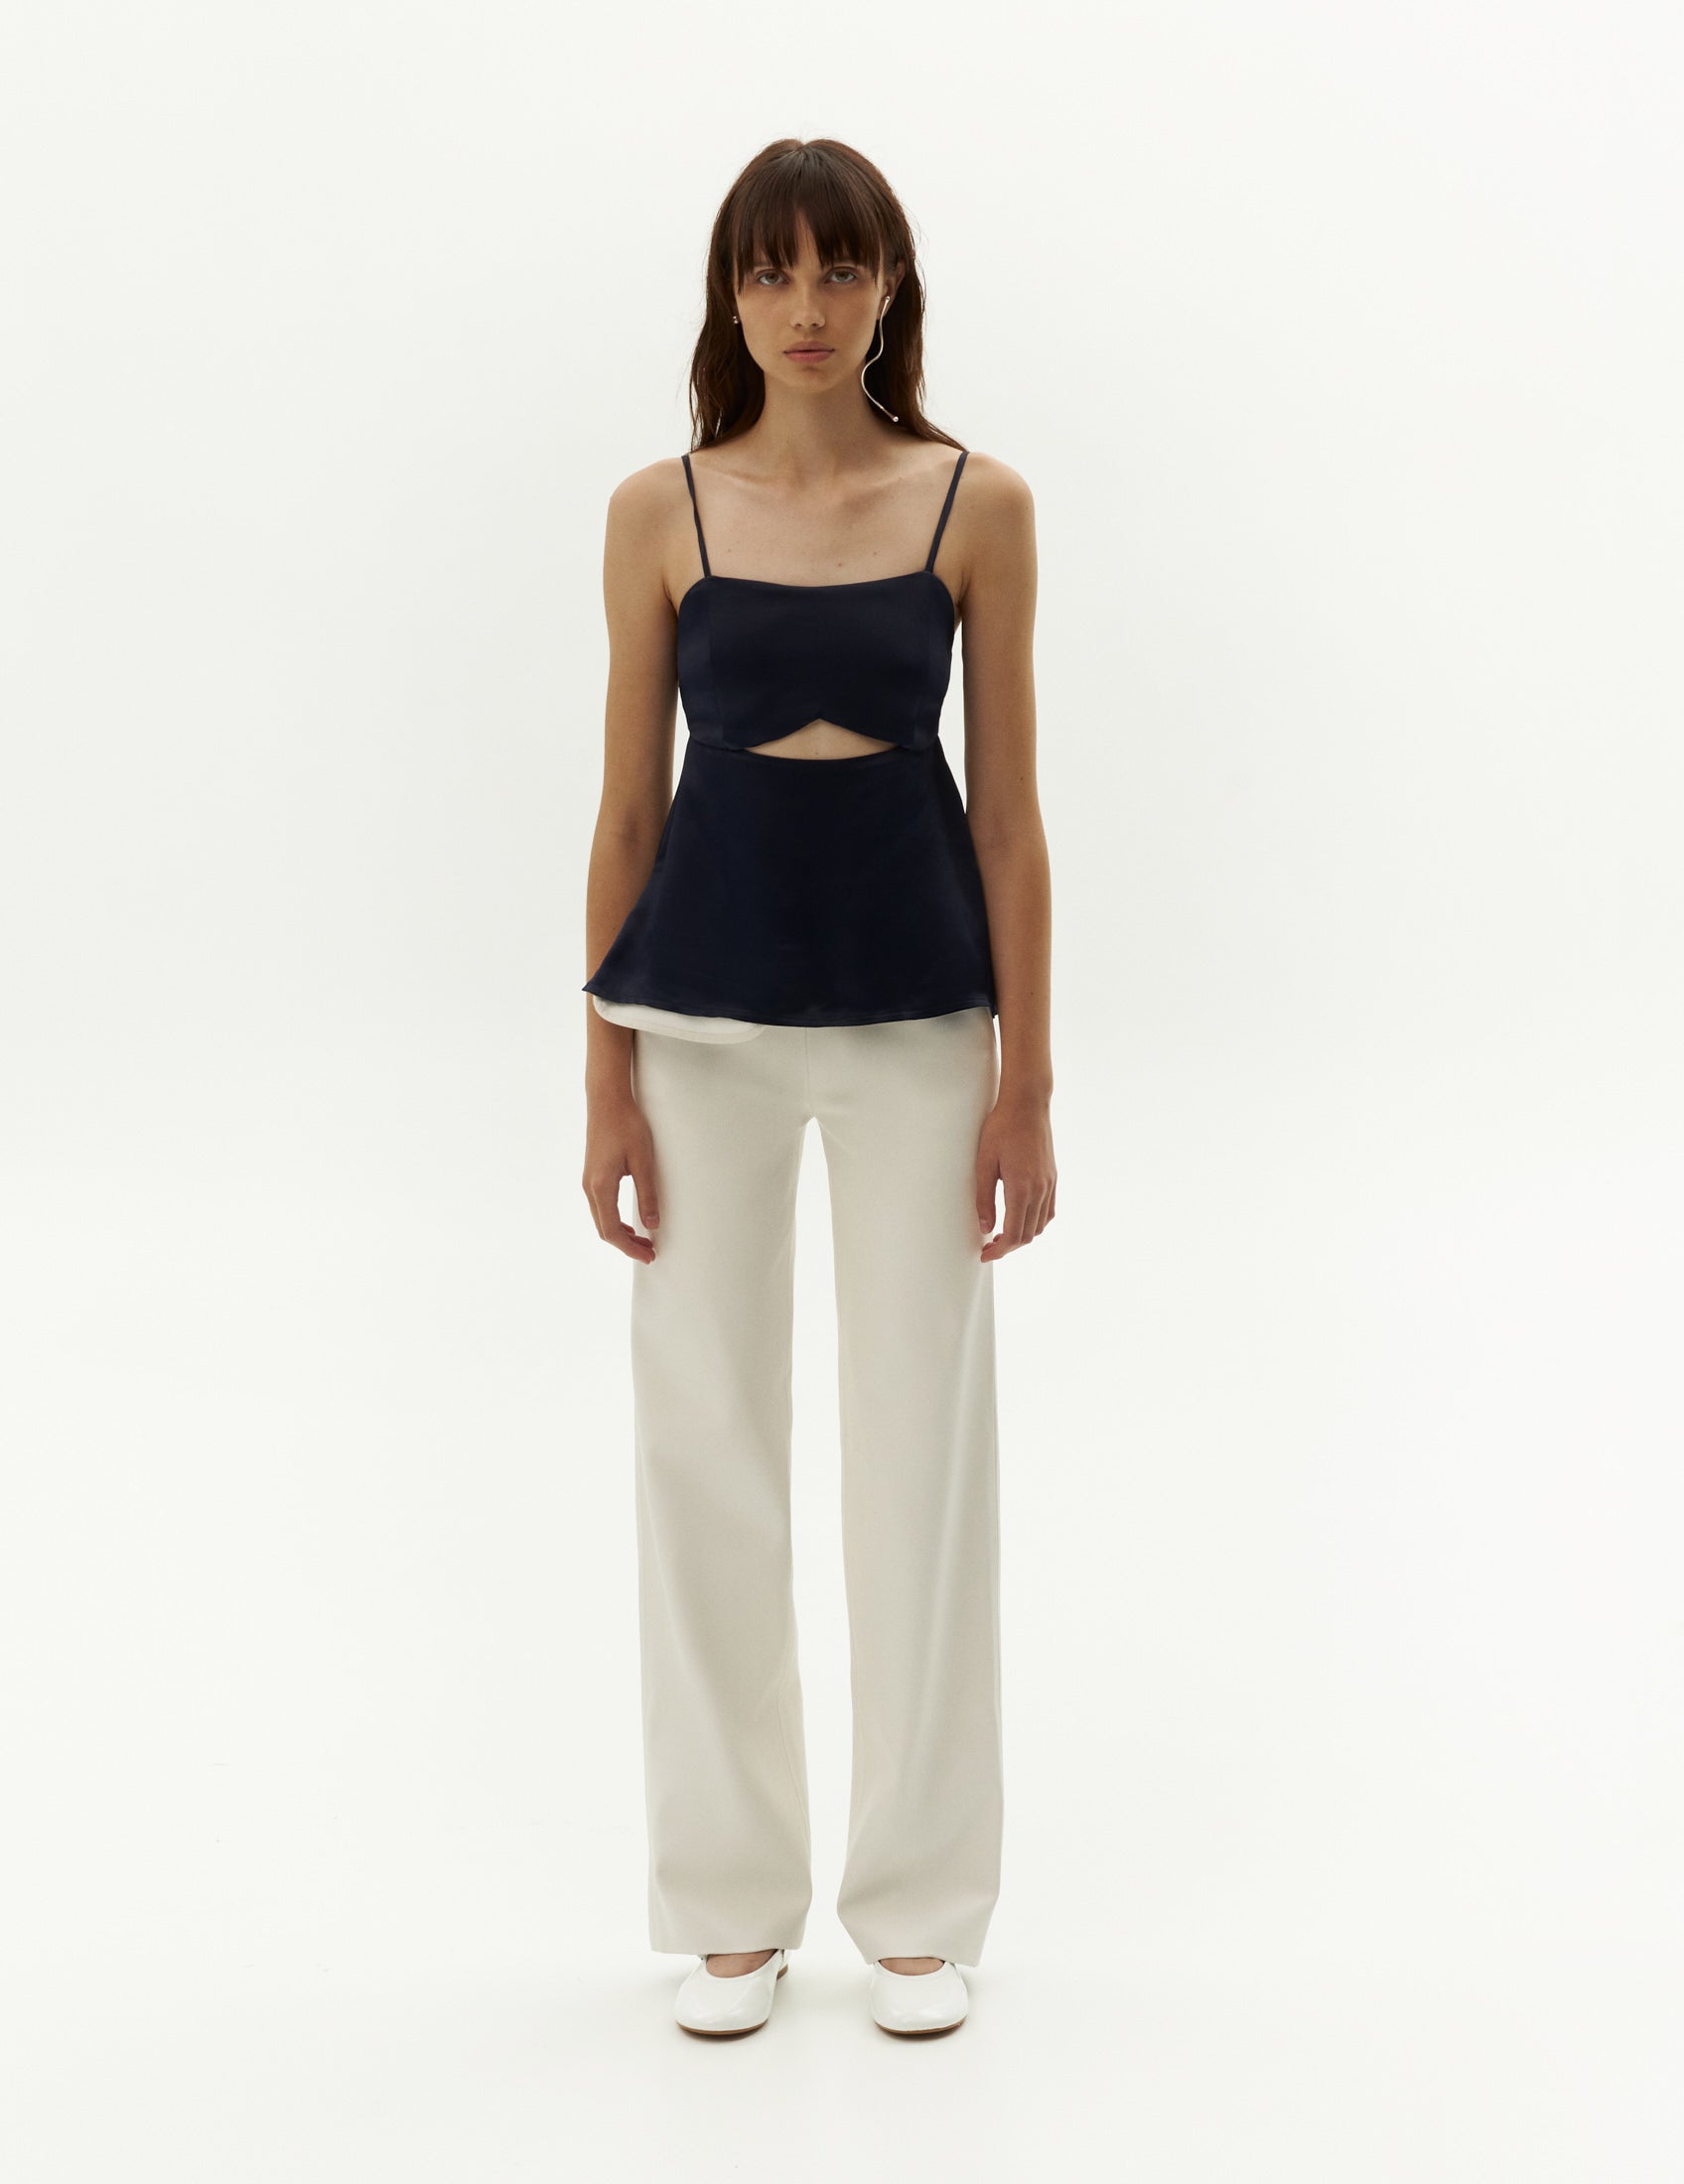 evening silk top with open back and cut-out details from forma brand